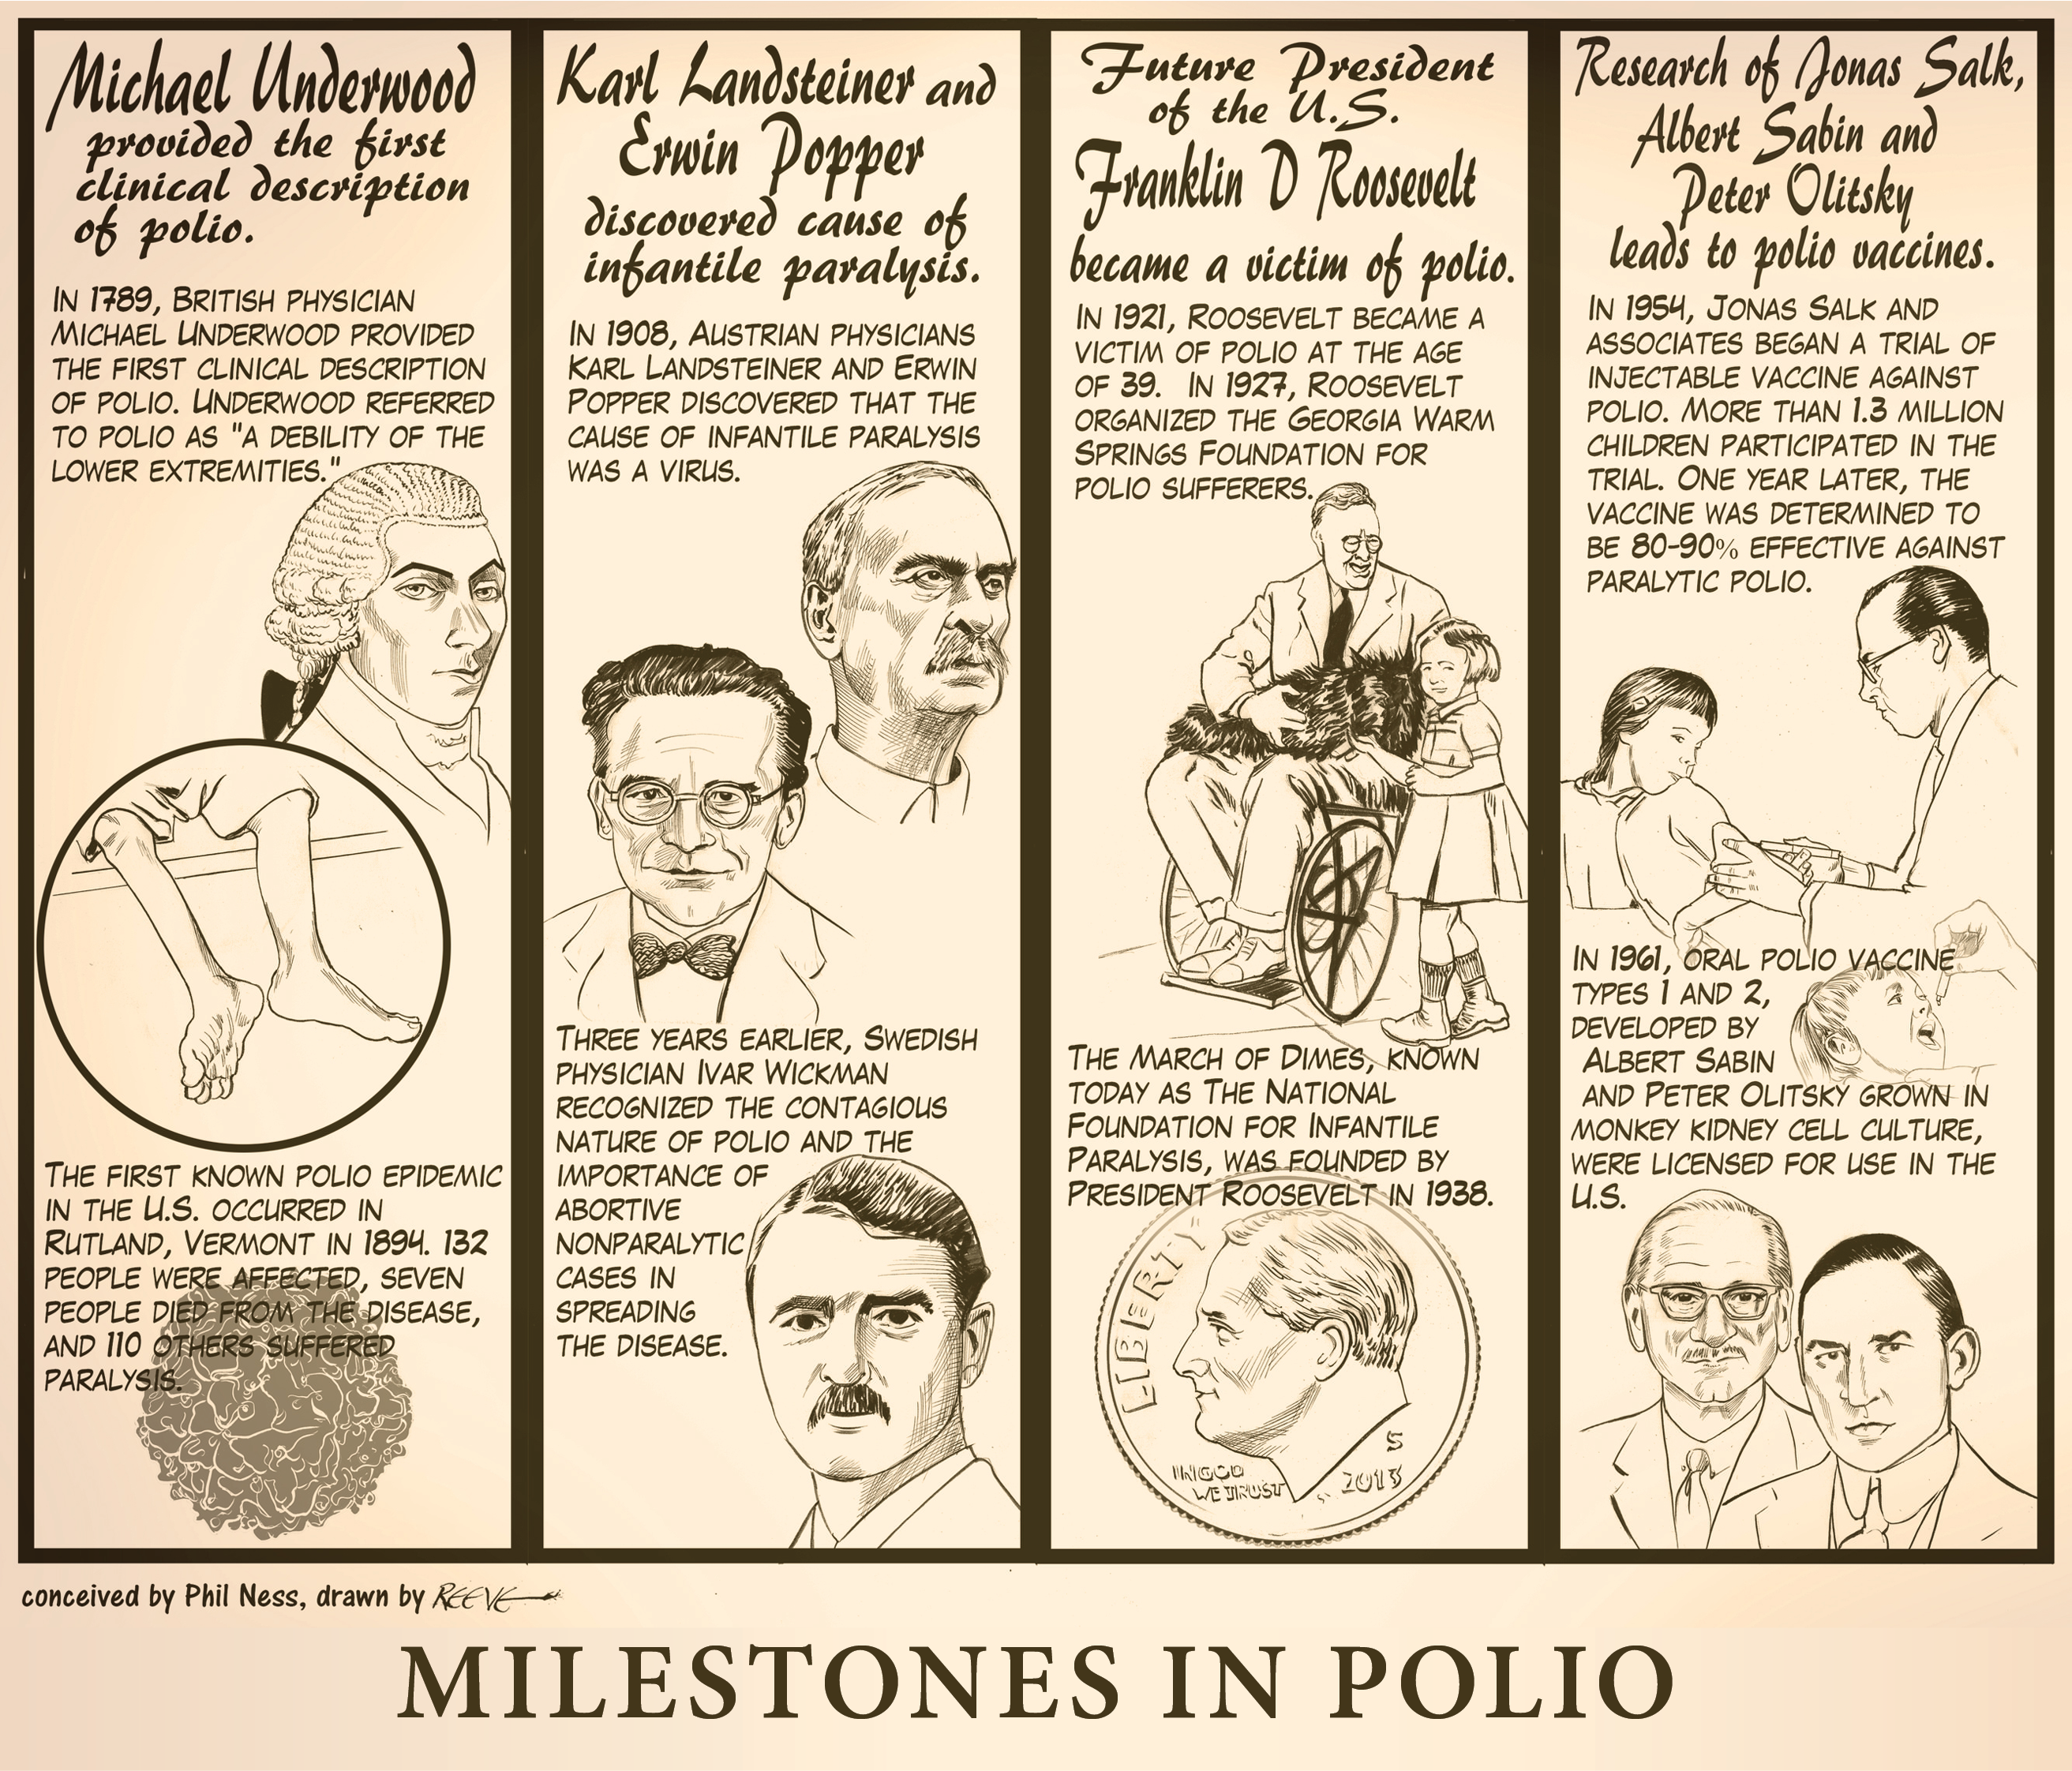 Cartoon: Milestones in Polio, Conceived by Phil Ness, drawn by Reeve, 2022.